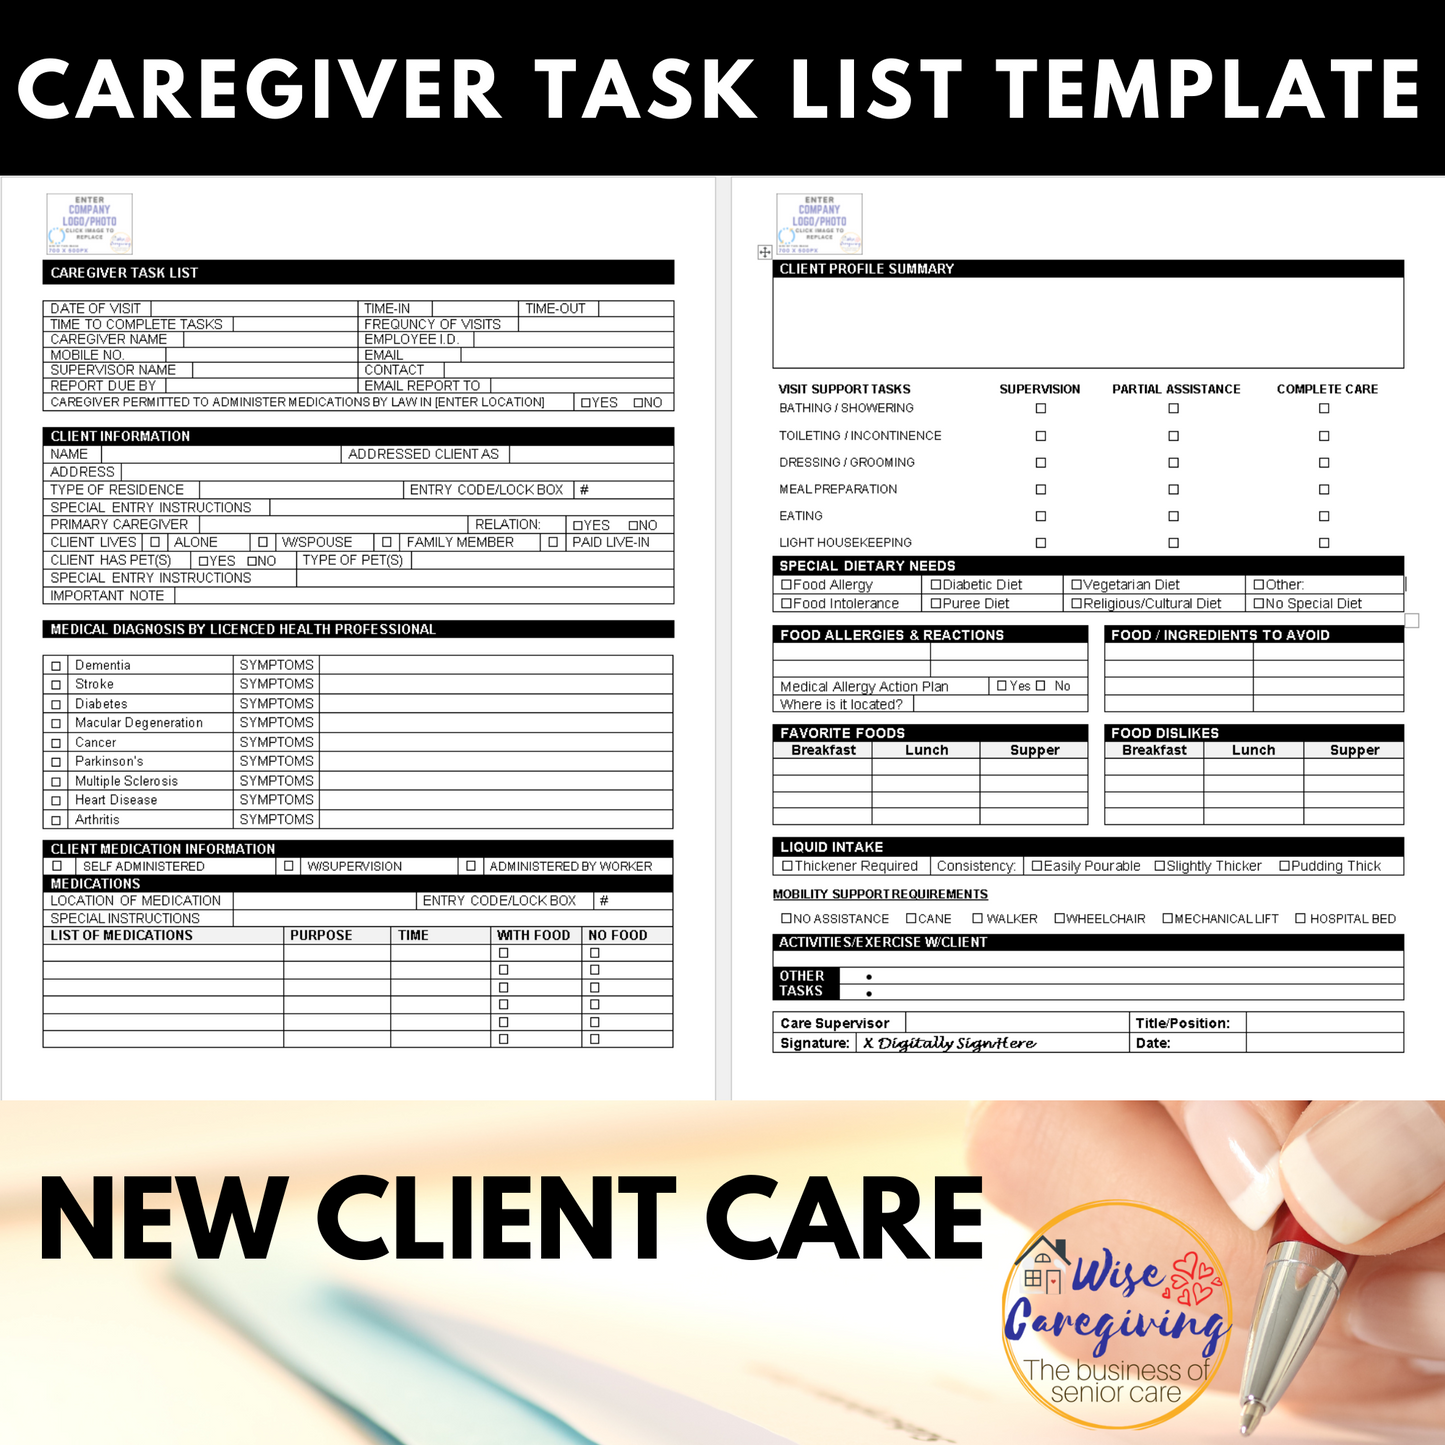 Caregiver Task List Template for New Home Care Clients